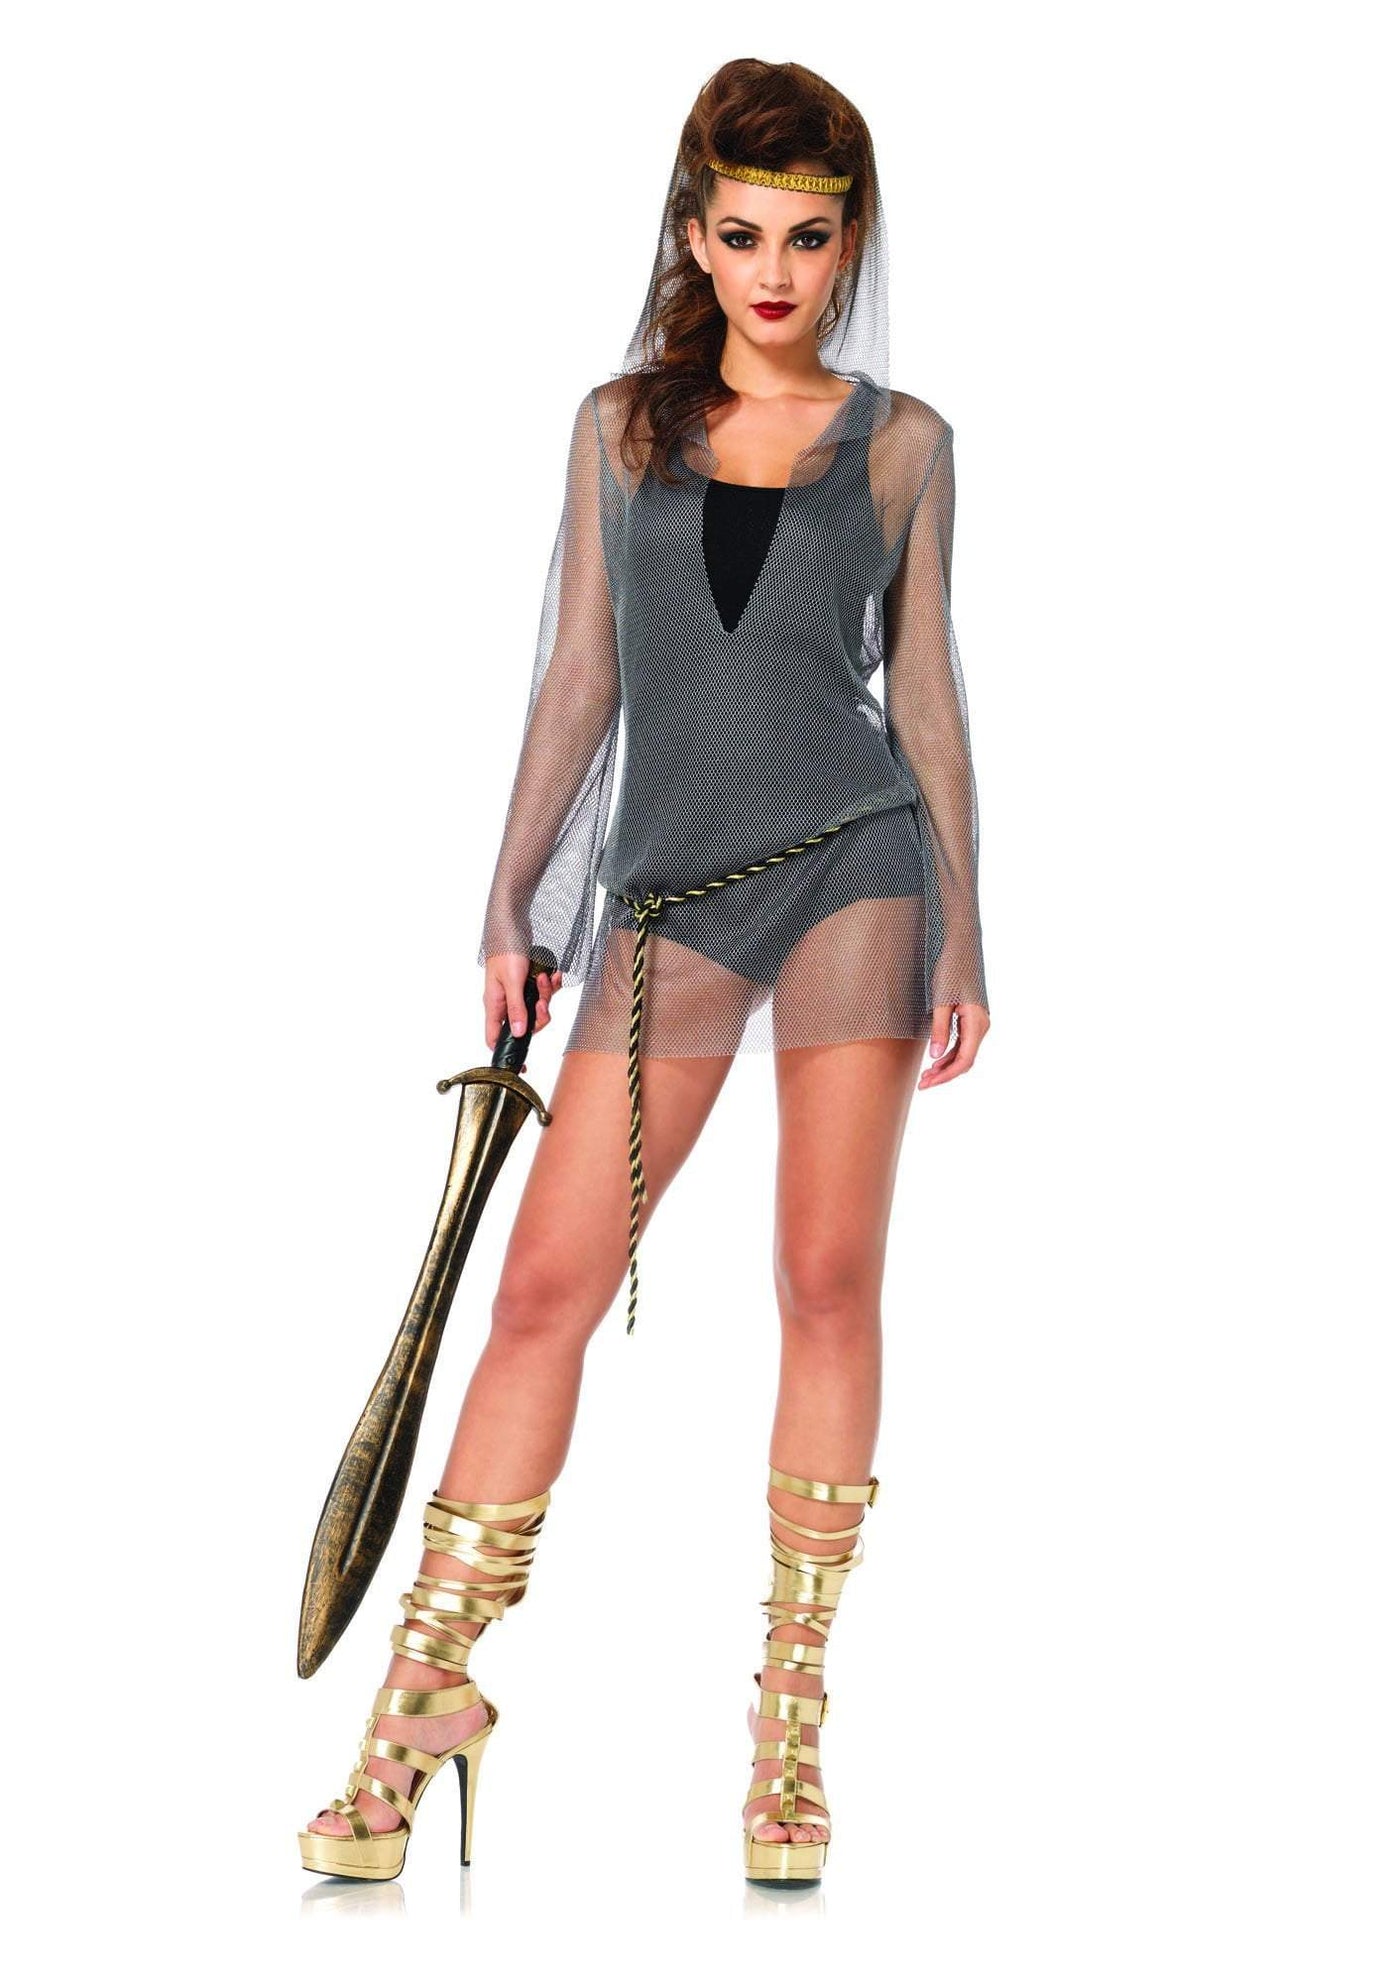 Chain Mail Hooded Dress - JJ's Party House